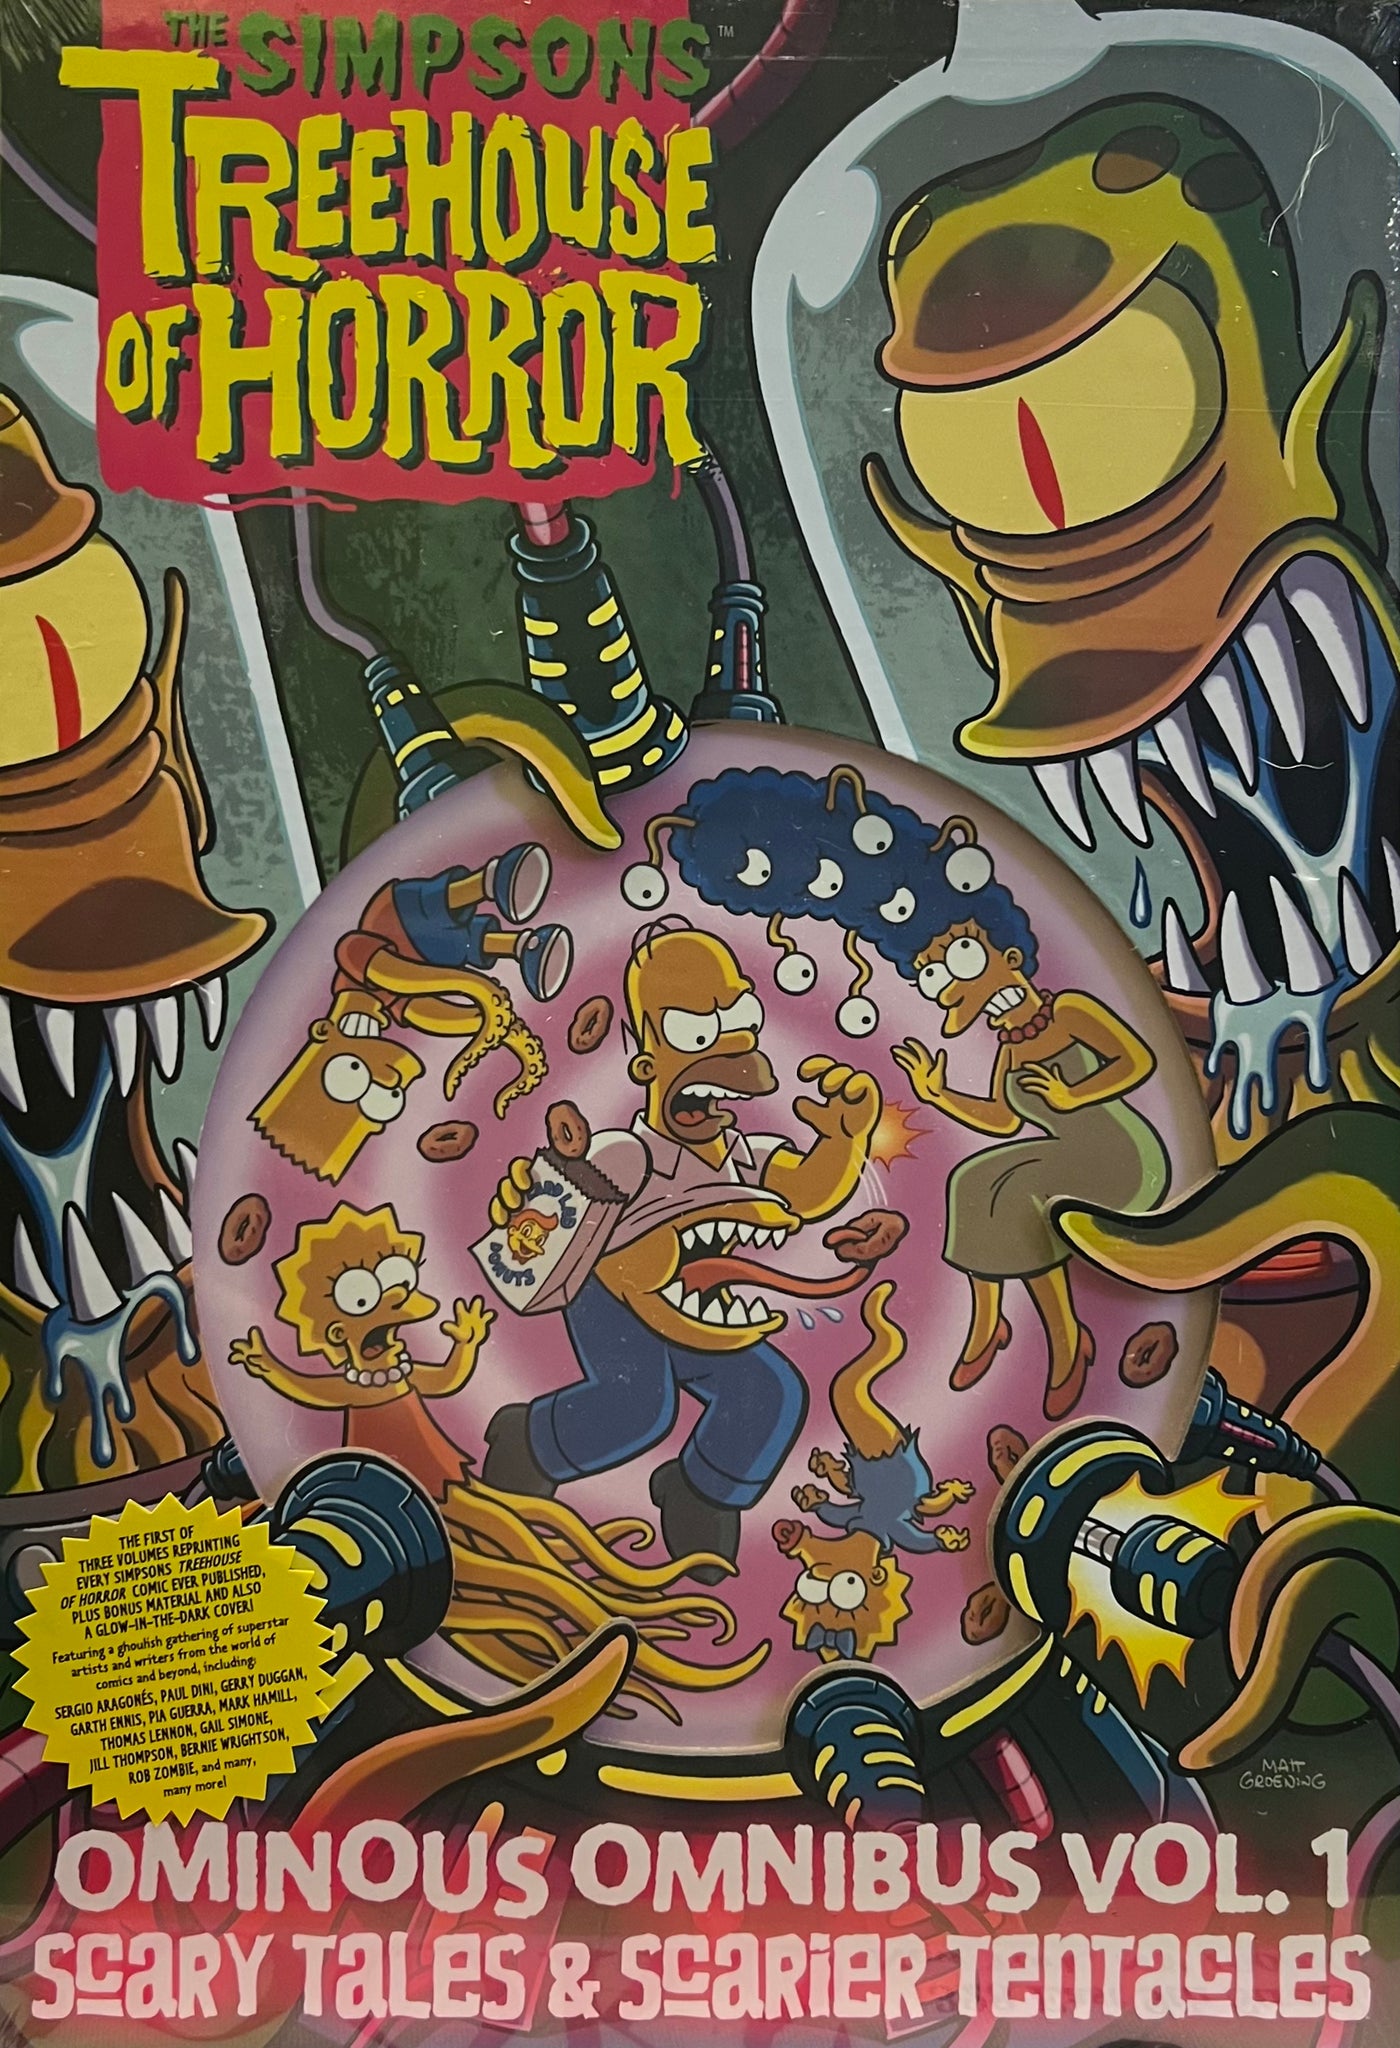 The Simpsons Treehouse of Horror: Ominous Omnibus Vol. 1: Scary Tales and Scarier Tentacles